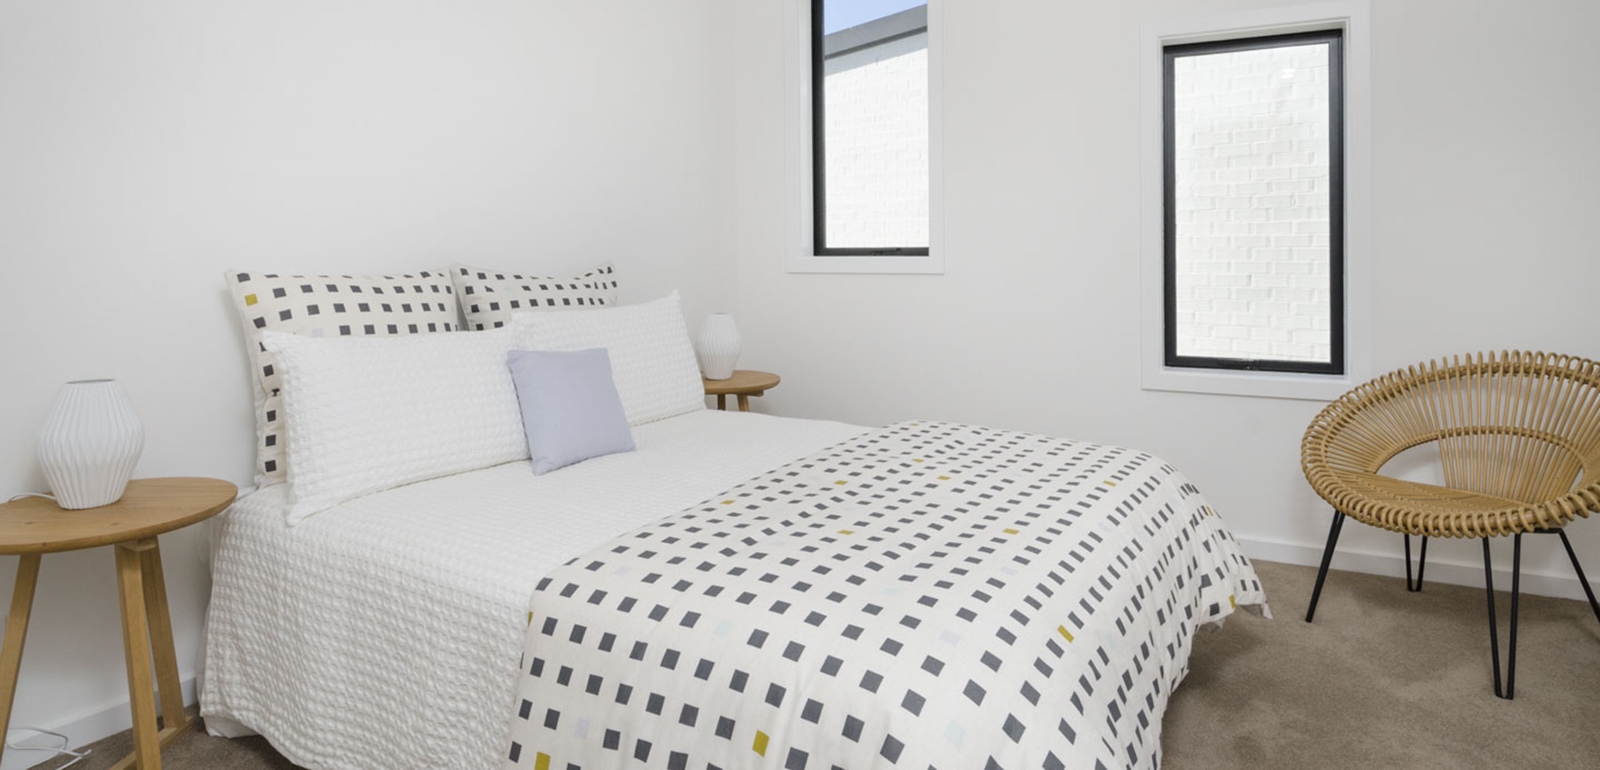 Bedroom at Classic Builders Hobsonville Point Showhome